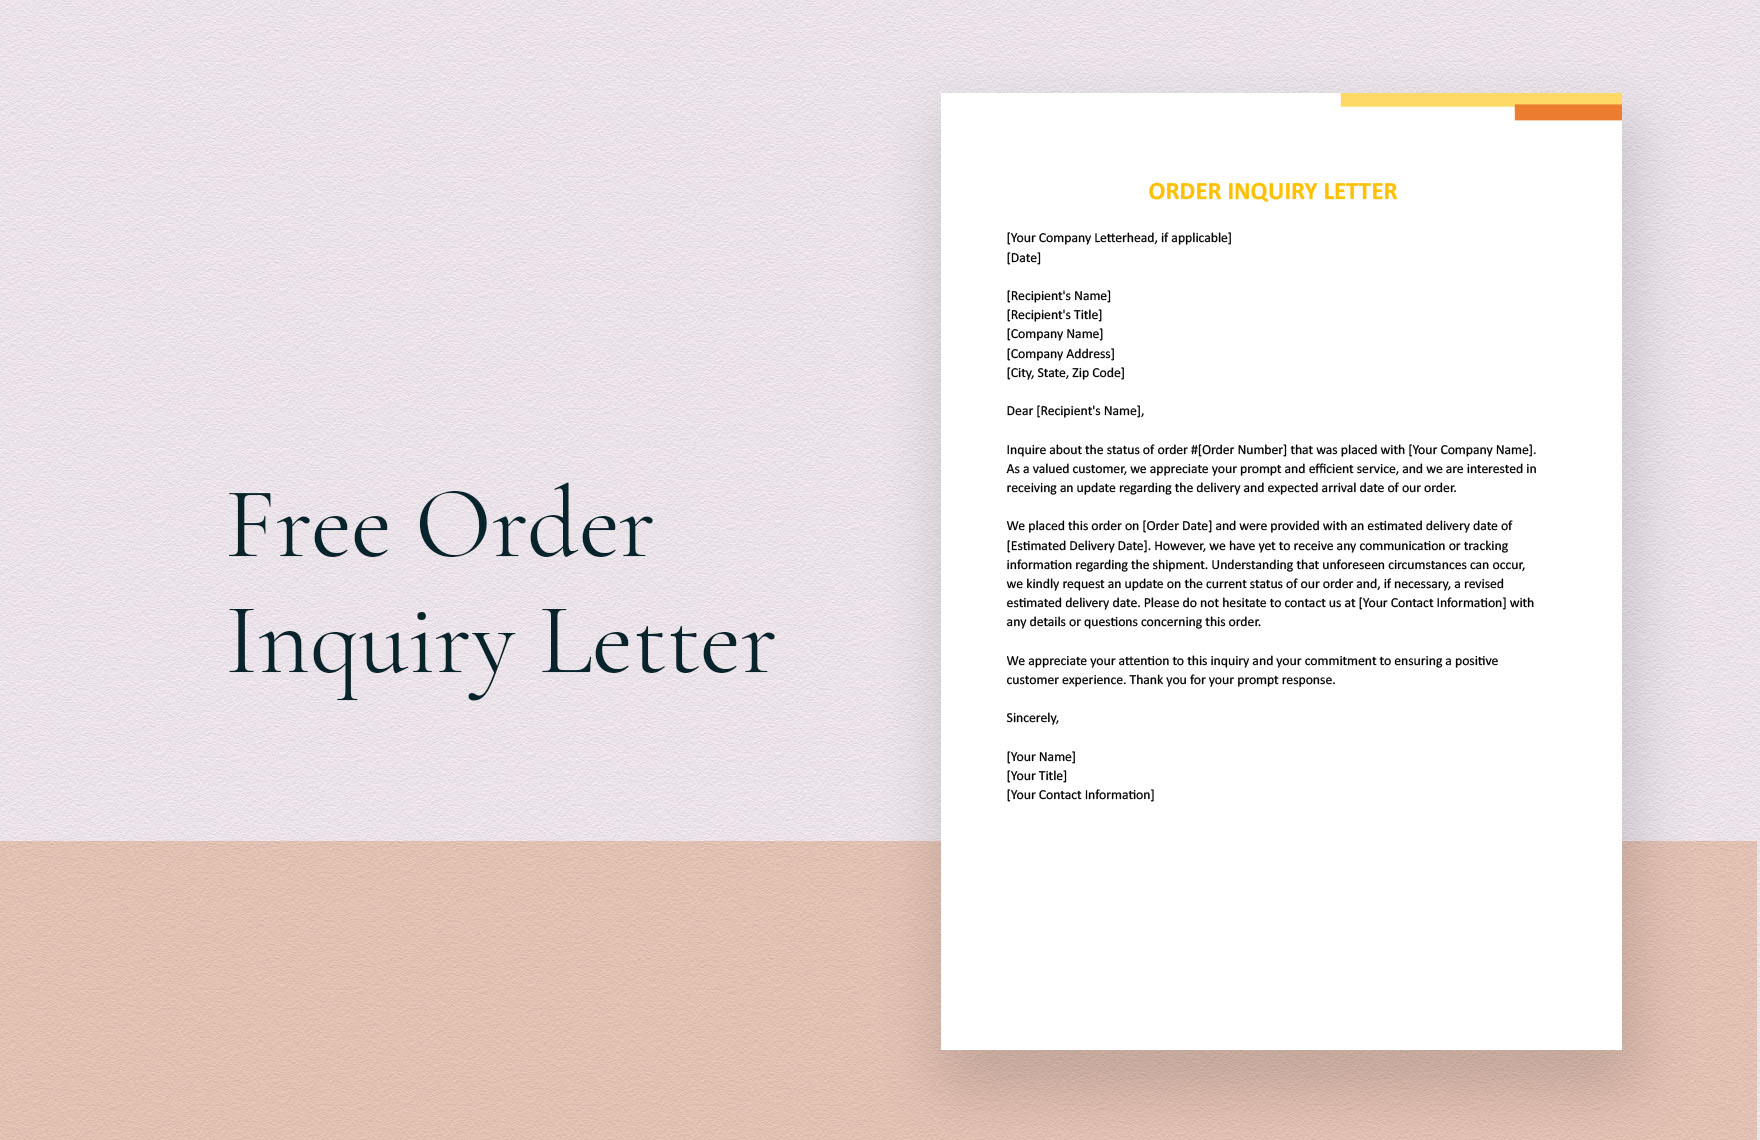 Order Inquiry Letter in Word, Google Docs